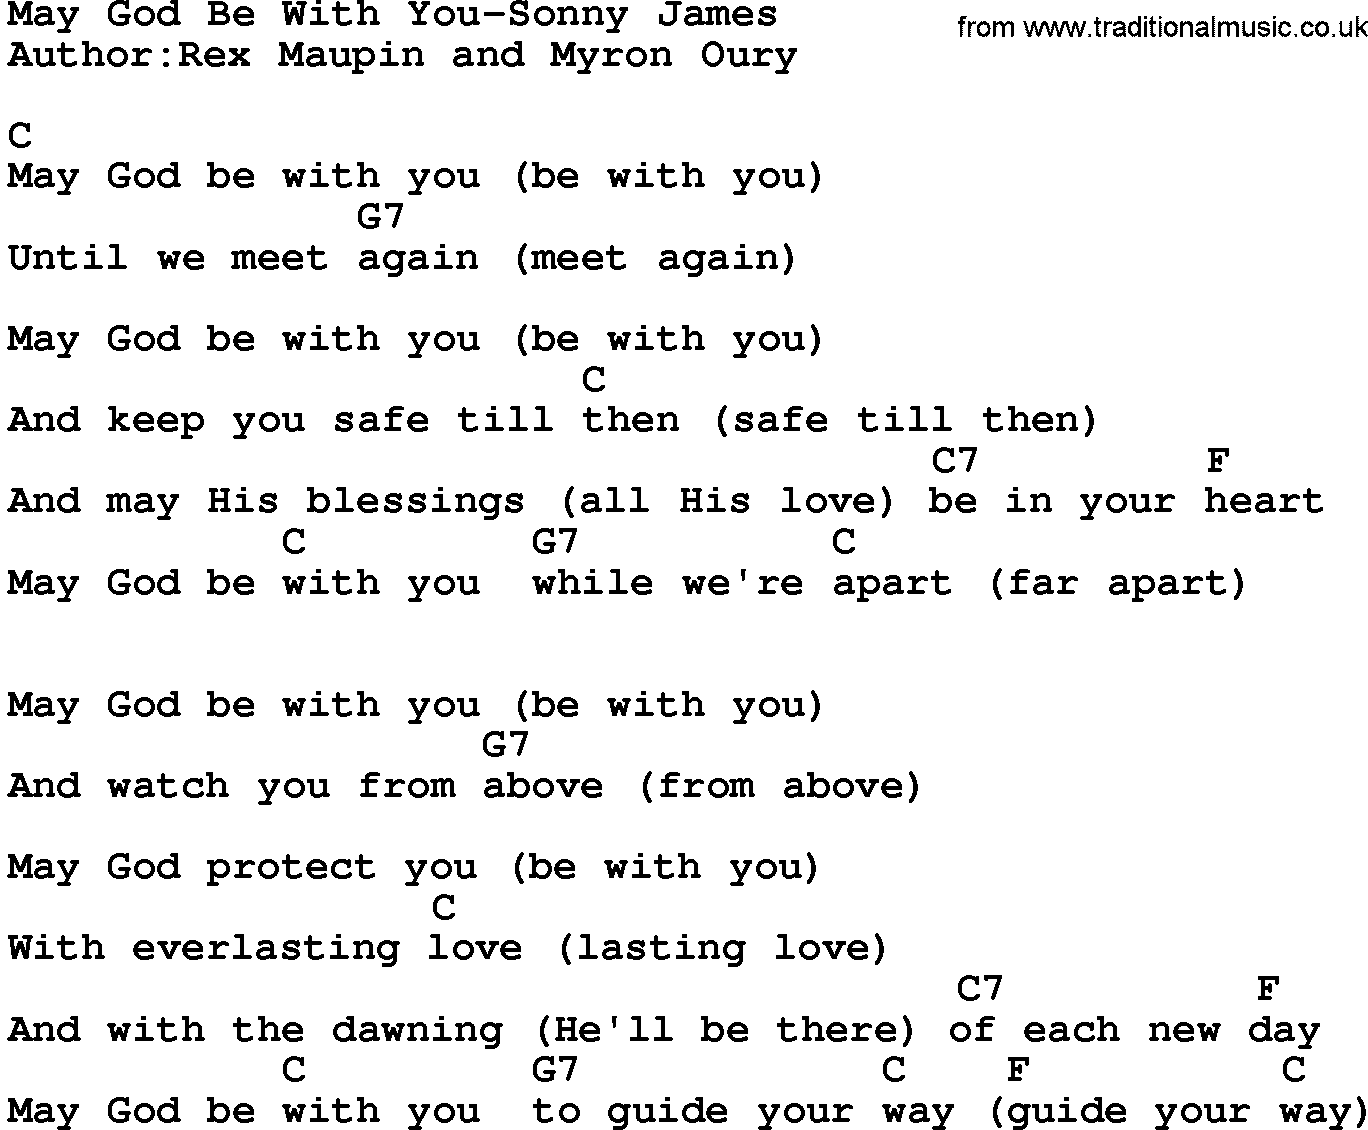 Country music song: May God Be With You-Sonny James lyrics and chords